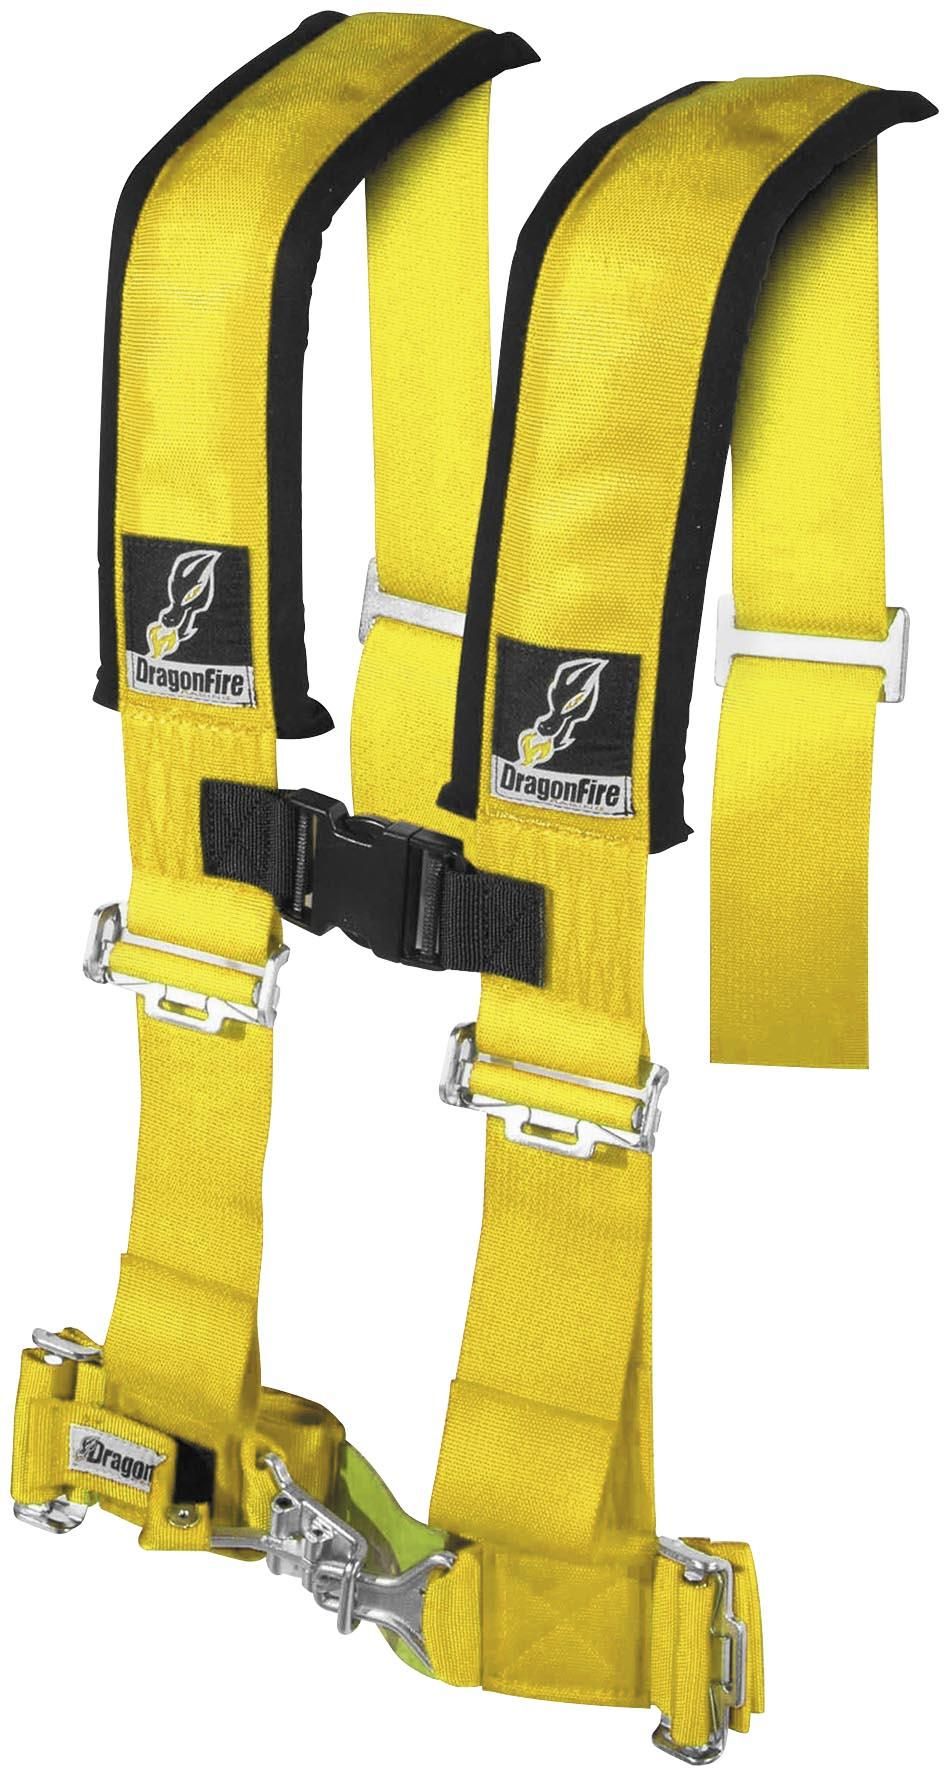 4LZH-DRAGONFIRE-14-0034 4-Point Racing Harness Restraints - 3in. Sewn - Yellow